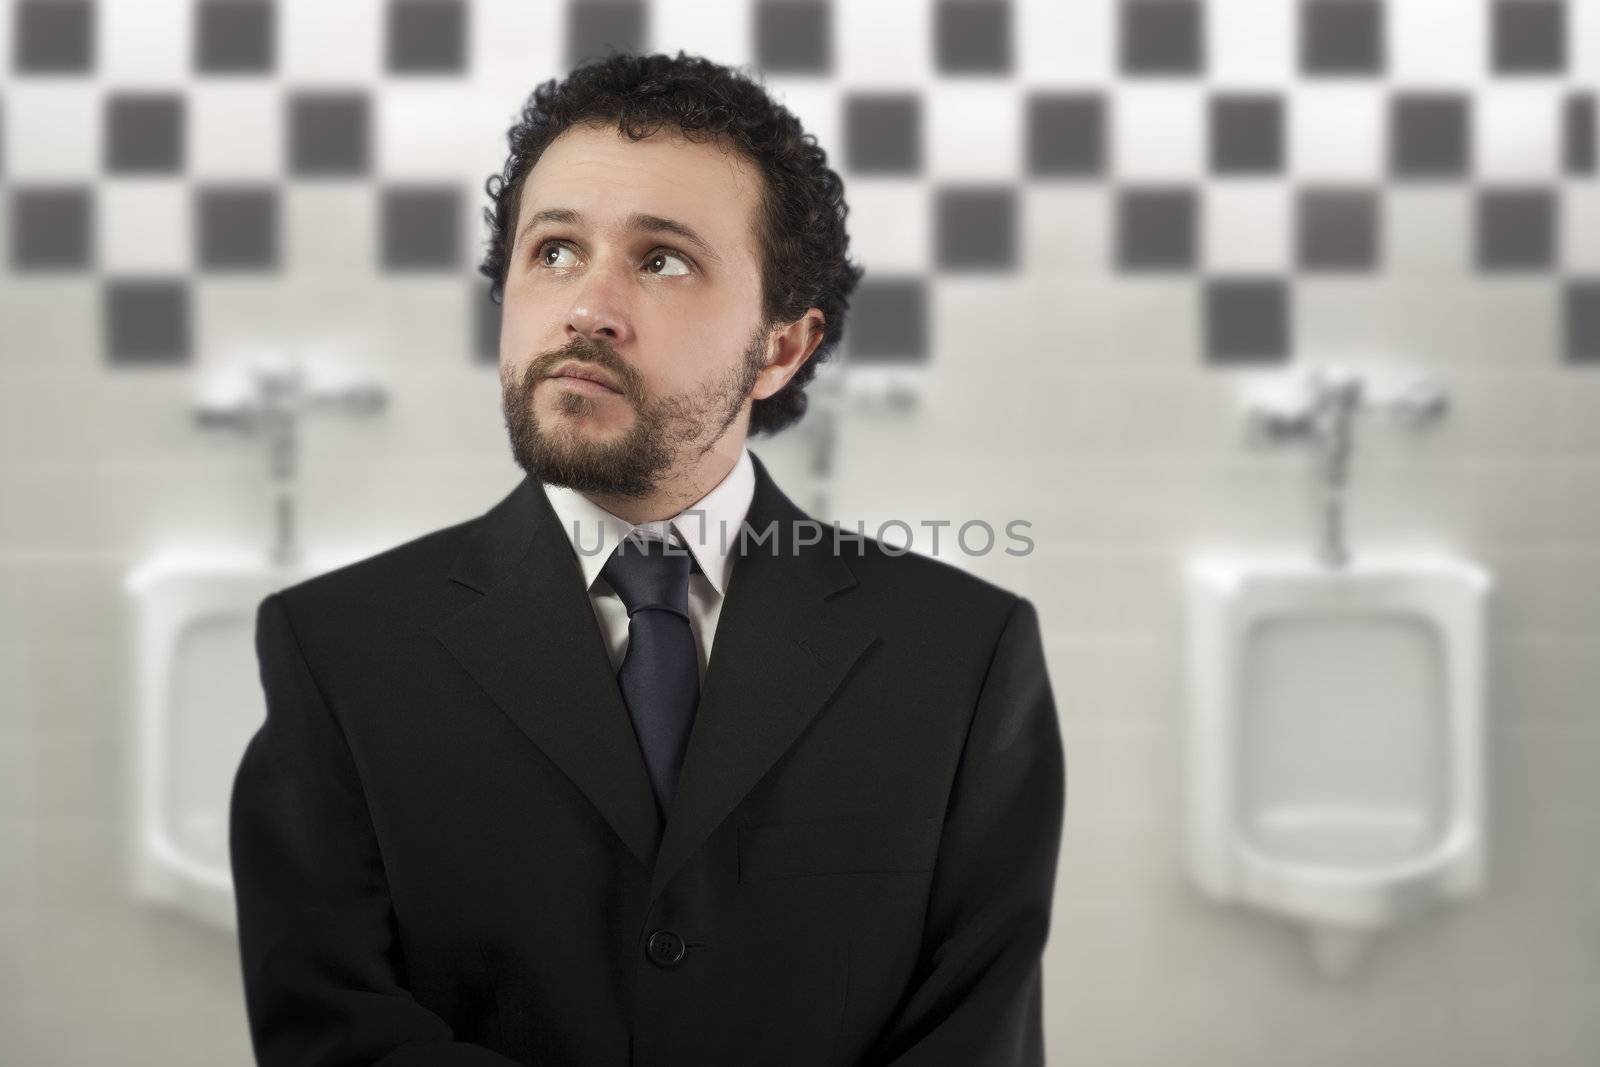 businessman with a distracted look urinating in urinals